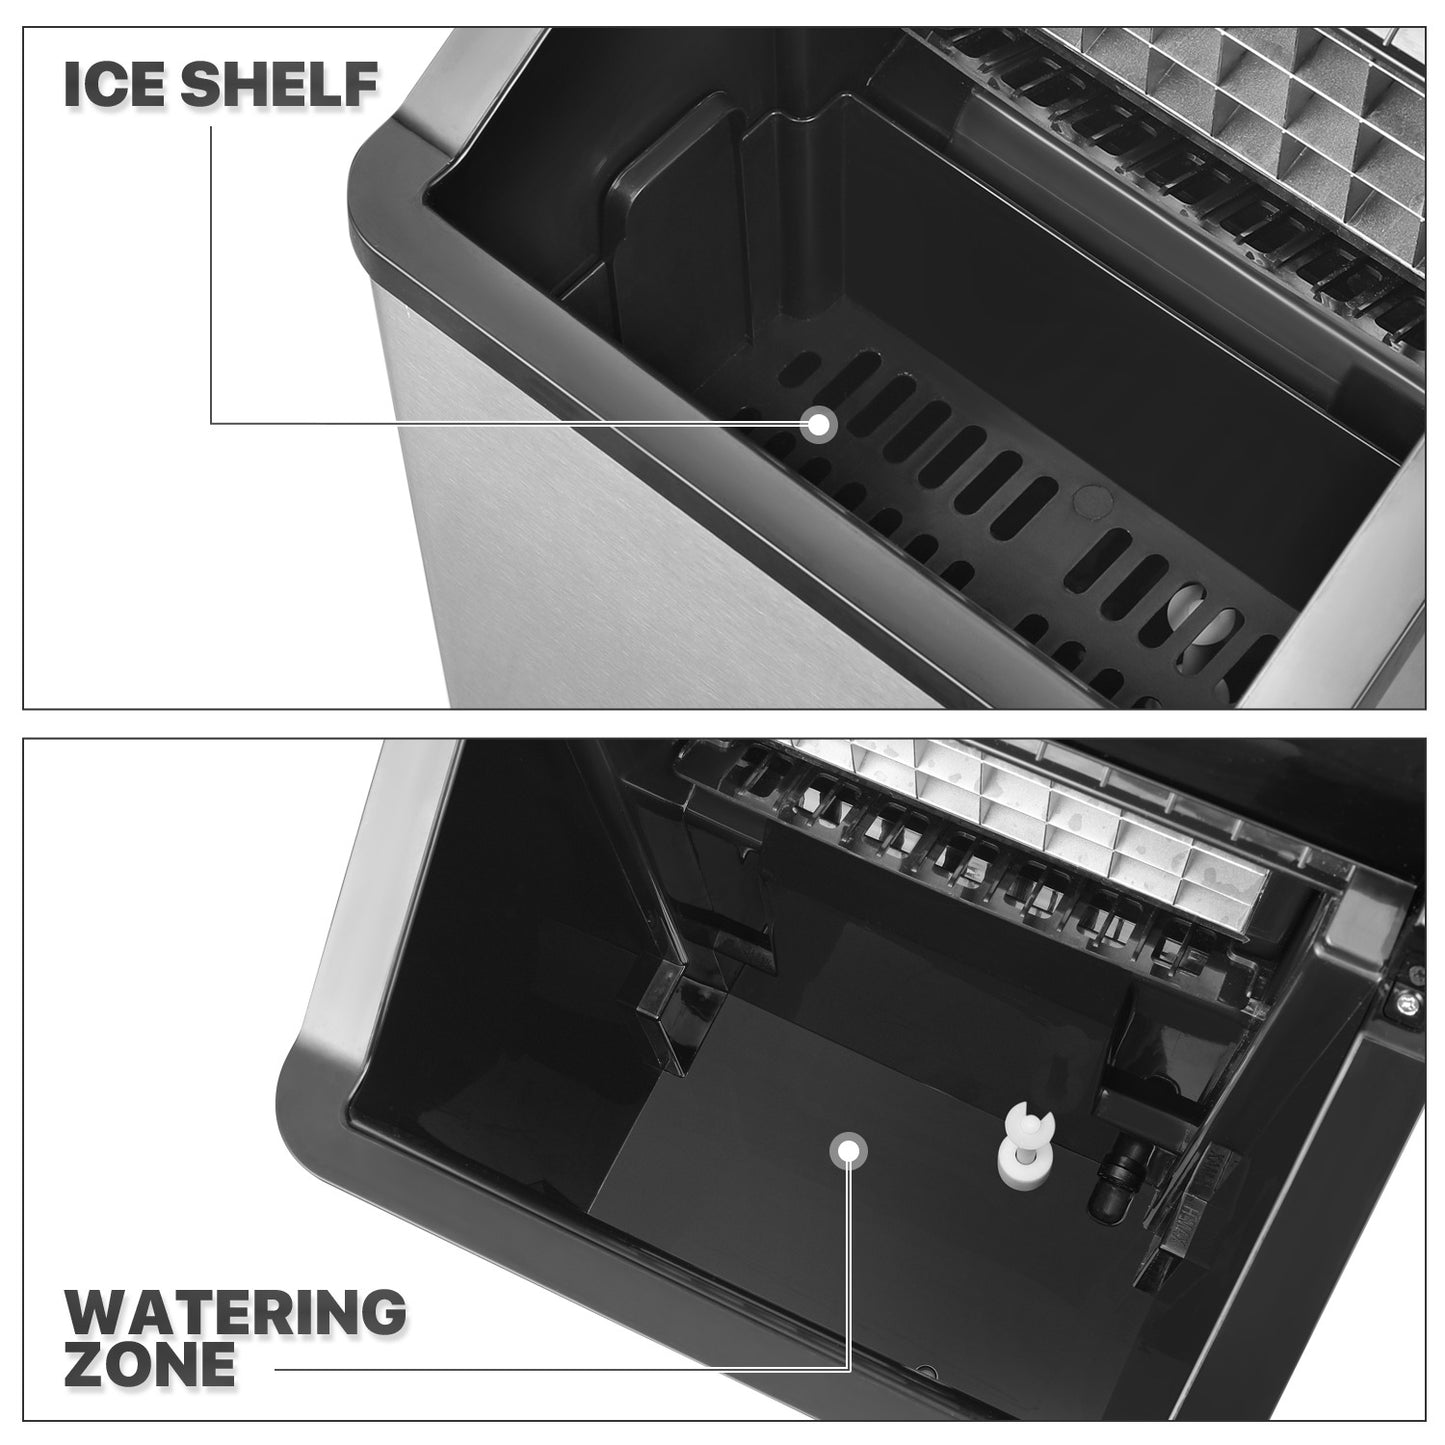 Ice Maker Machine - 2.5L Storage Tank - Bullet Shape - 33lbs/ 24hrs - with Scoop